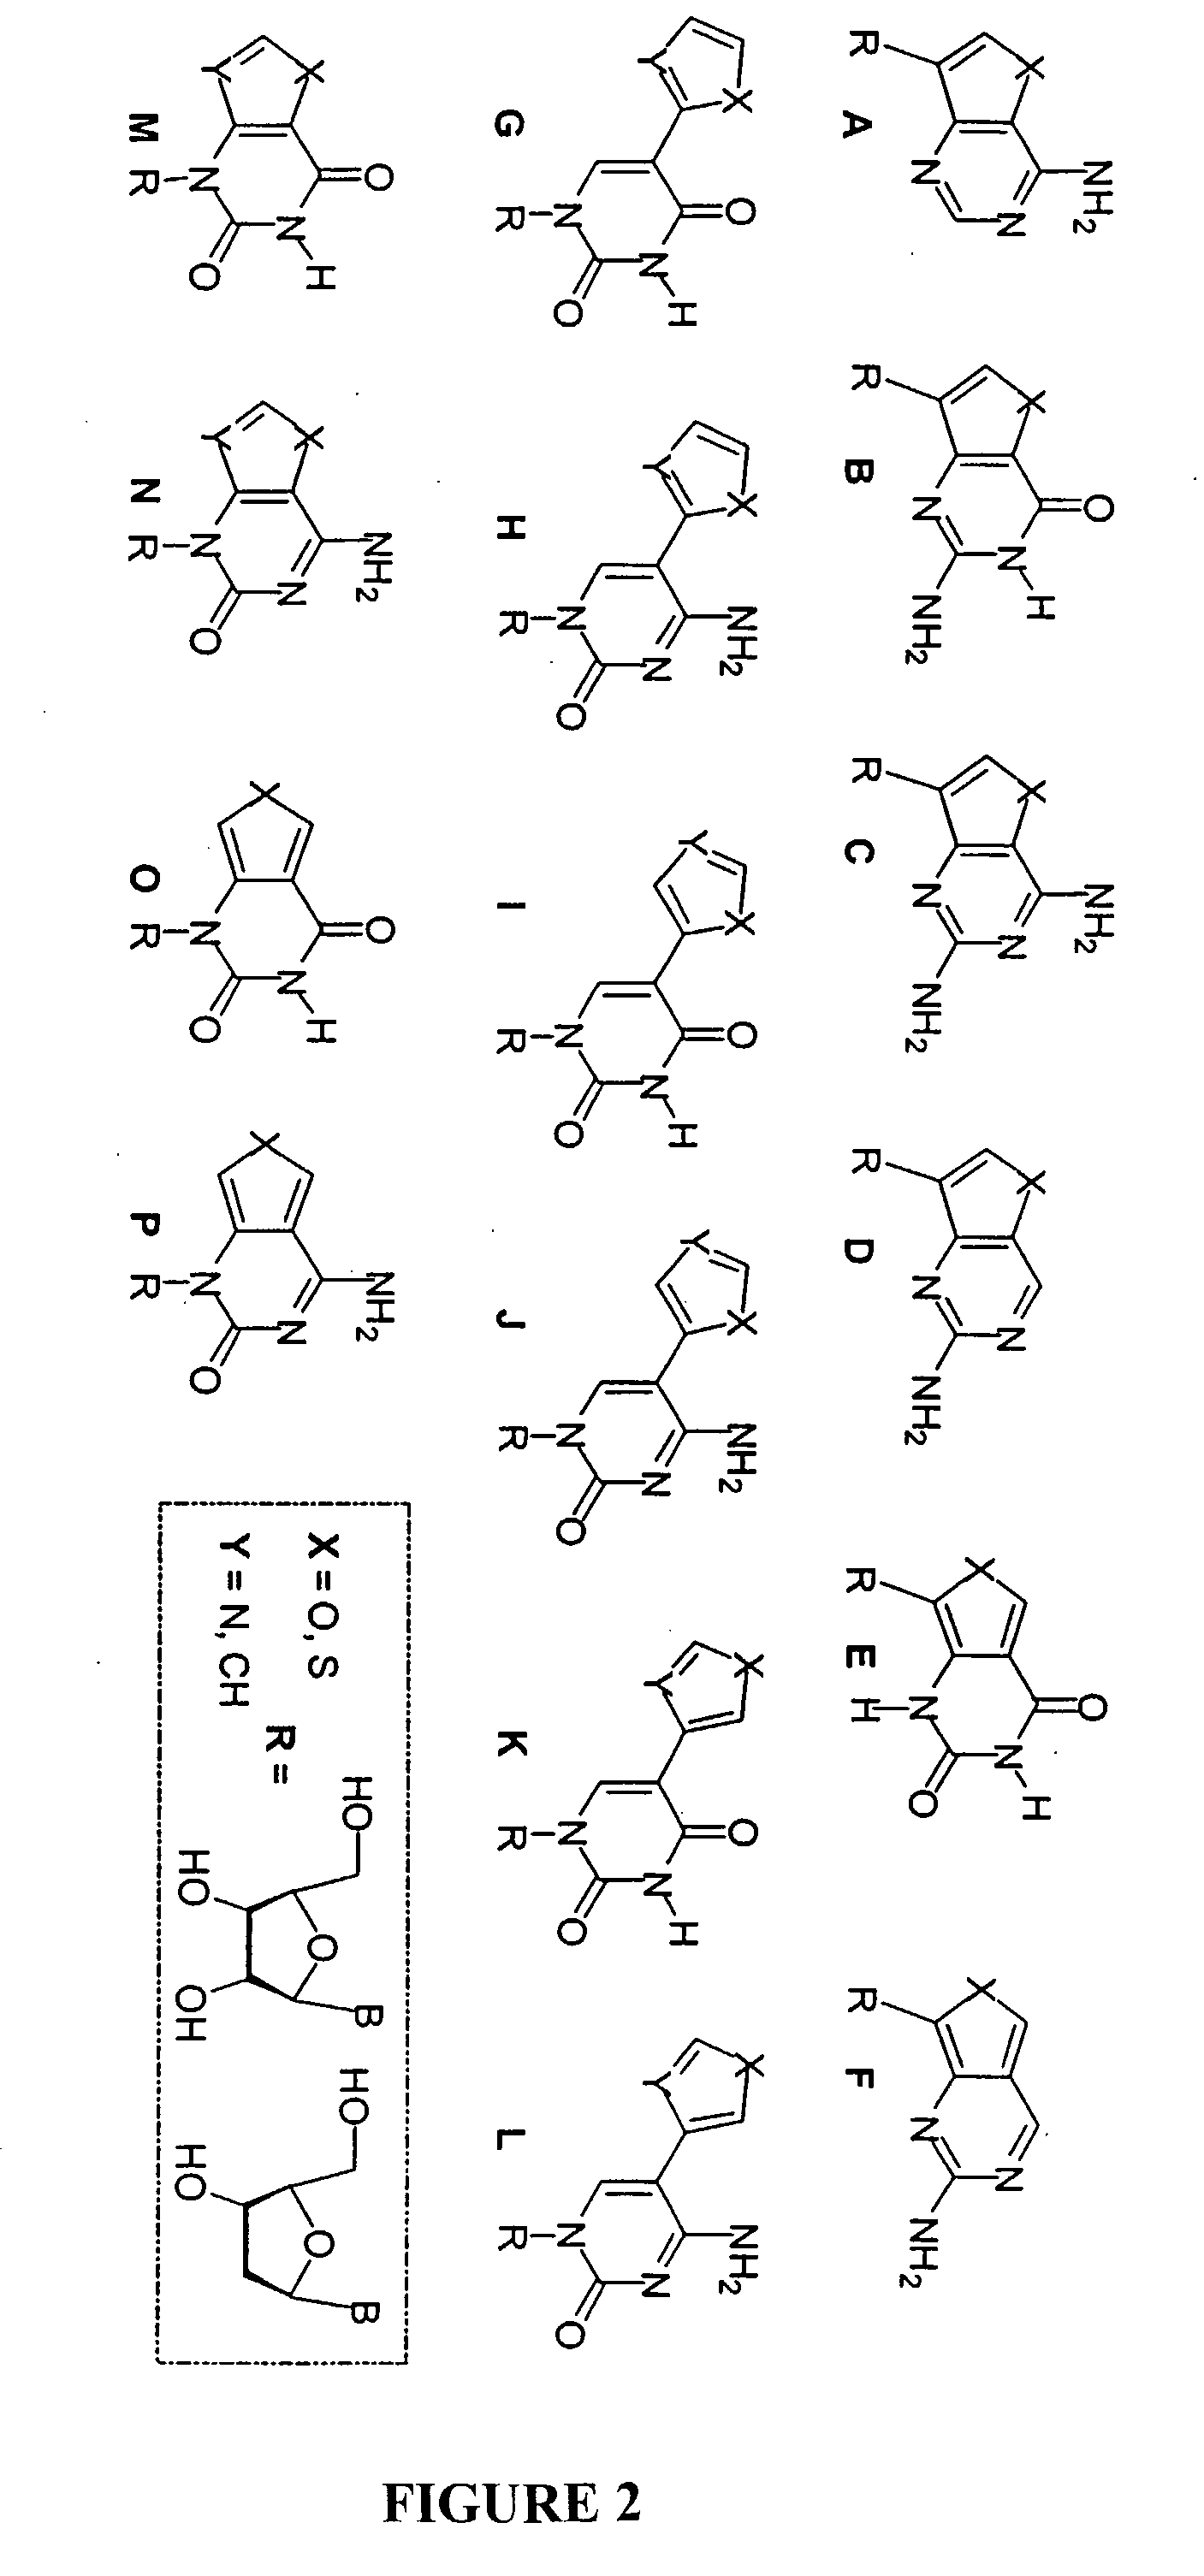 Fluorescent Nucleoside Analogs That Mimic Naturally Occurring Nucleosides